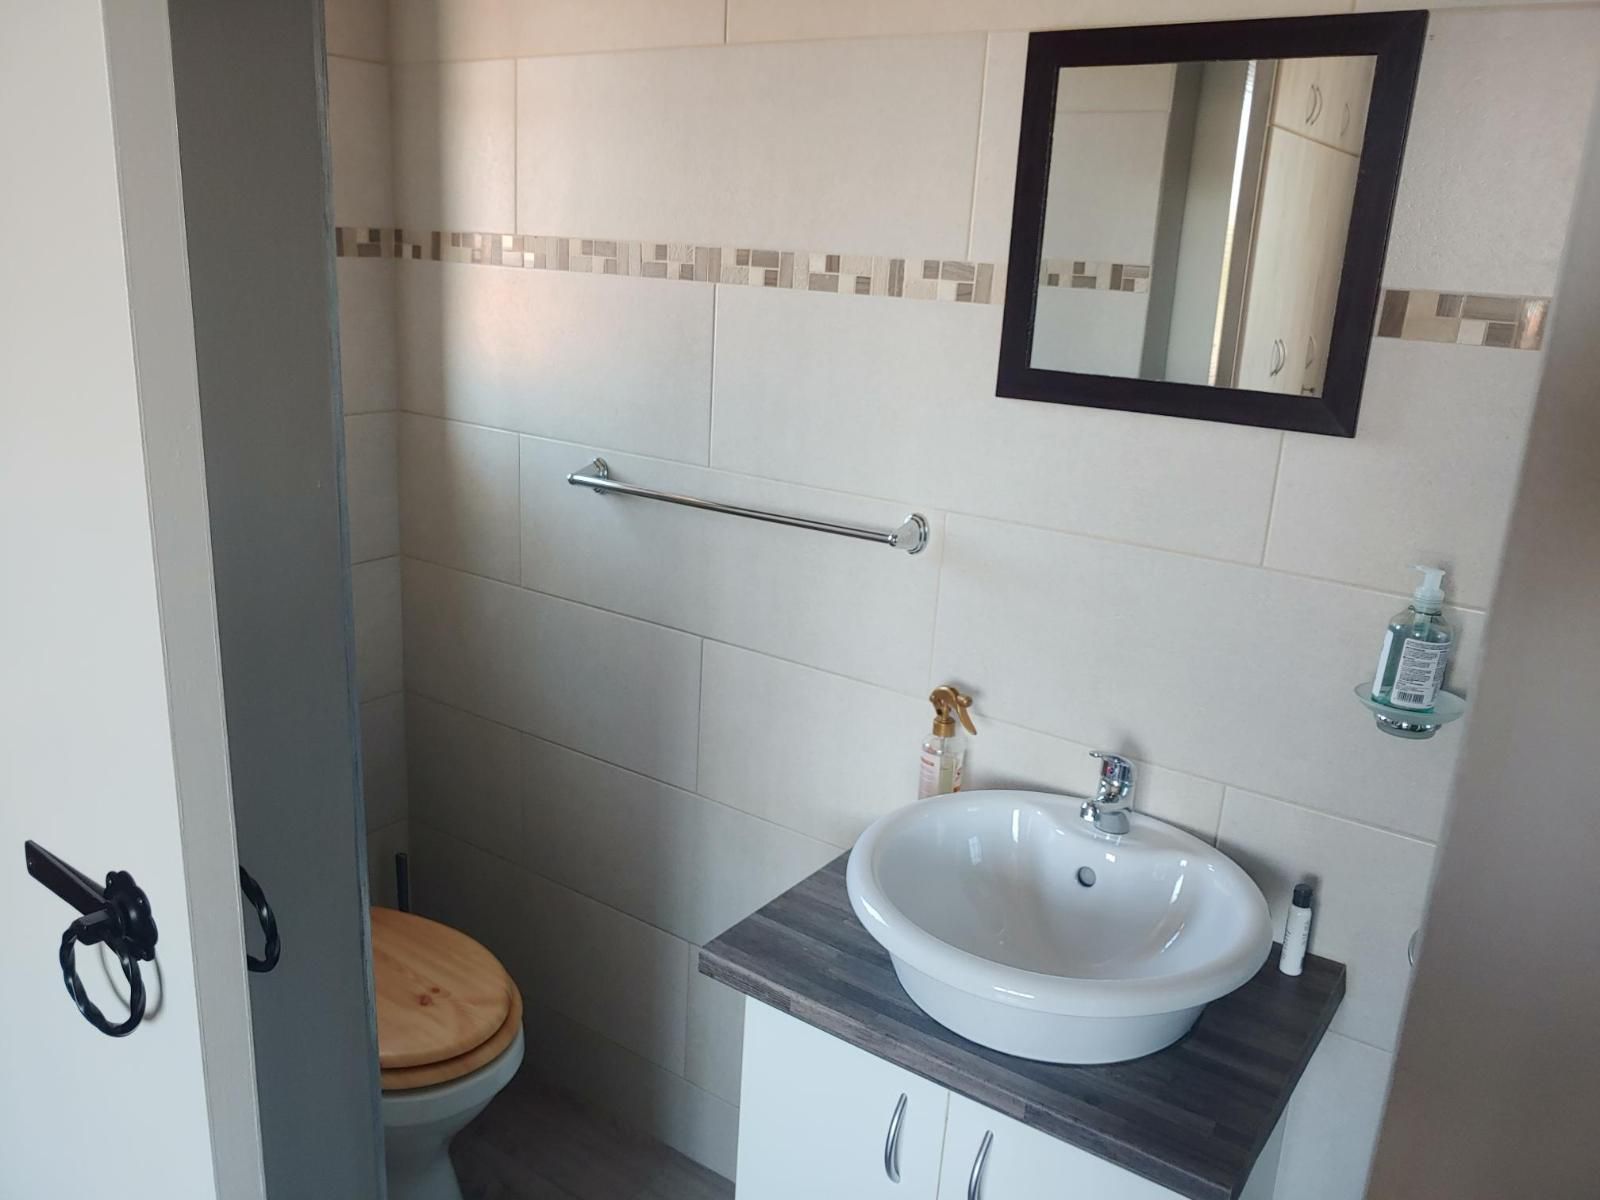 Boutique Hotel On The Bay Humewood Port Elizabeth Eastern Cape South Africa Unsaturated, Bathroom